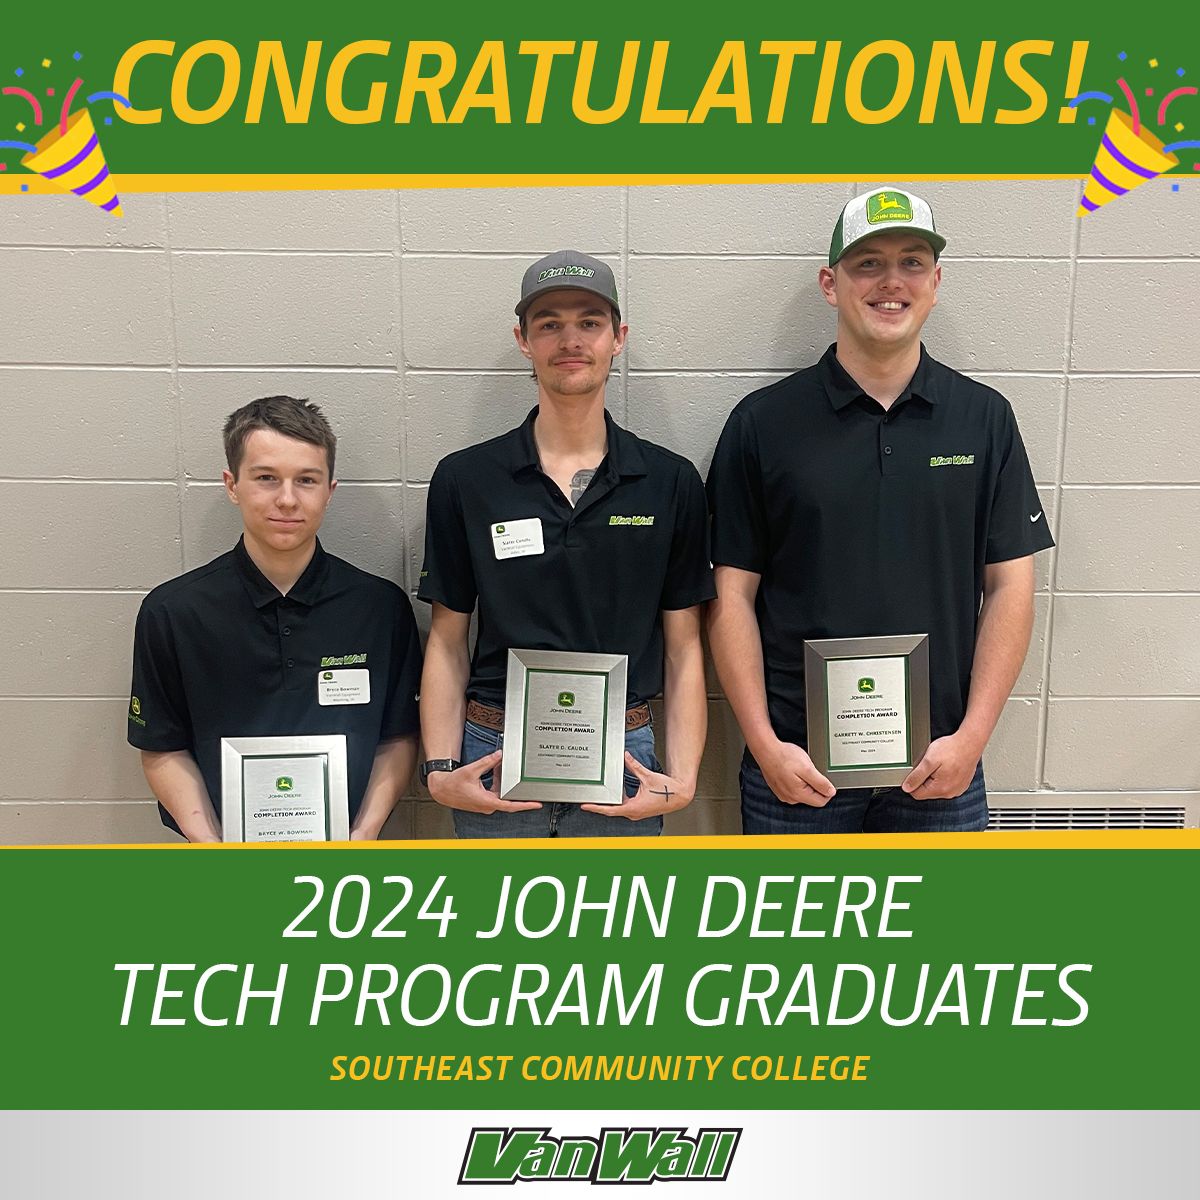 Graduation season is still upon us - and we couldn't be more thrilled to celebrate these gentlemen on their recent #JohnDeere Tech Program completion at @SCCNeb! 🎓 Garrett, Slater, & Bryce have worked extra hard over the last two years to balance their training.